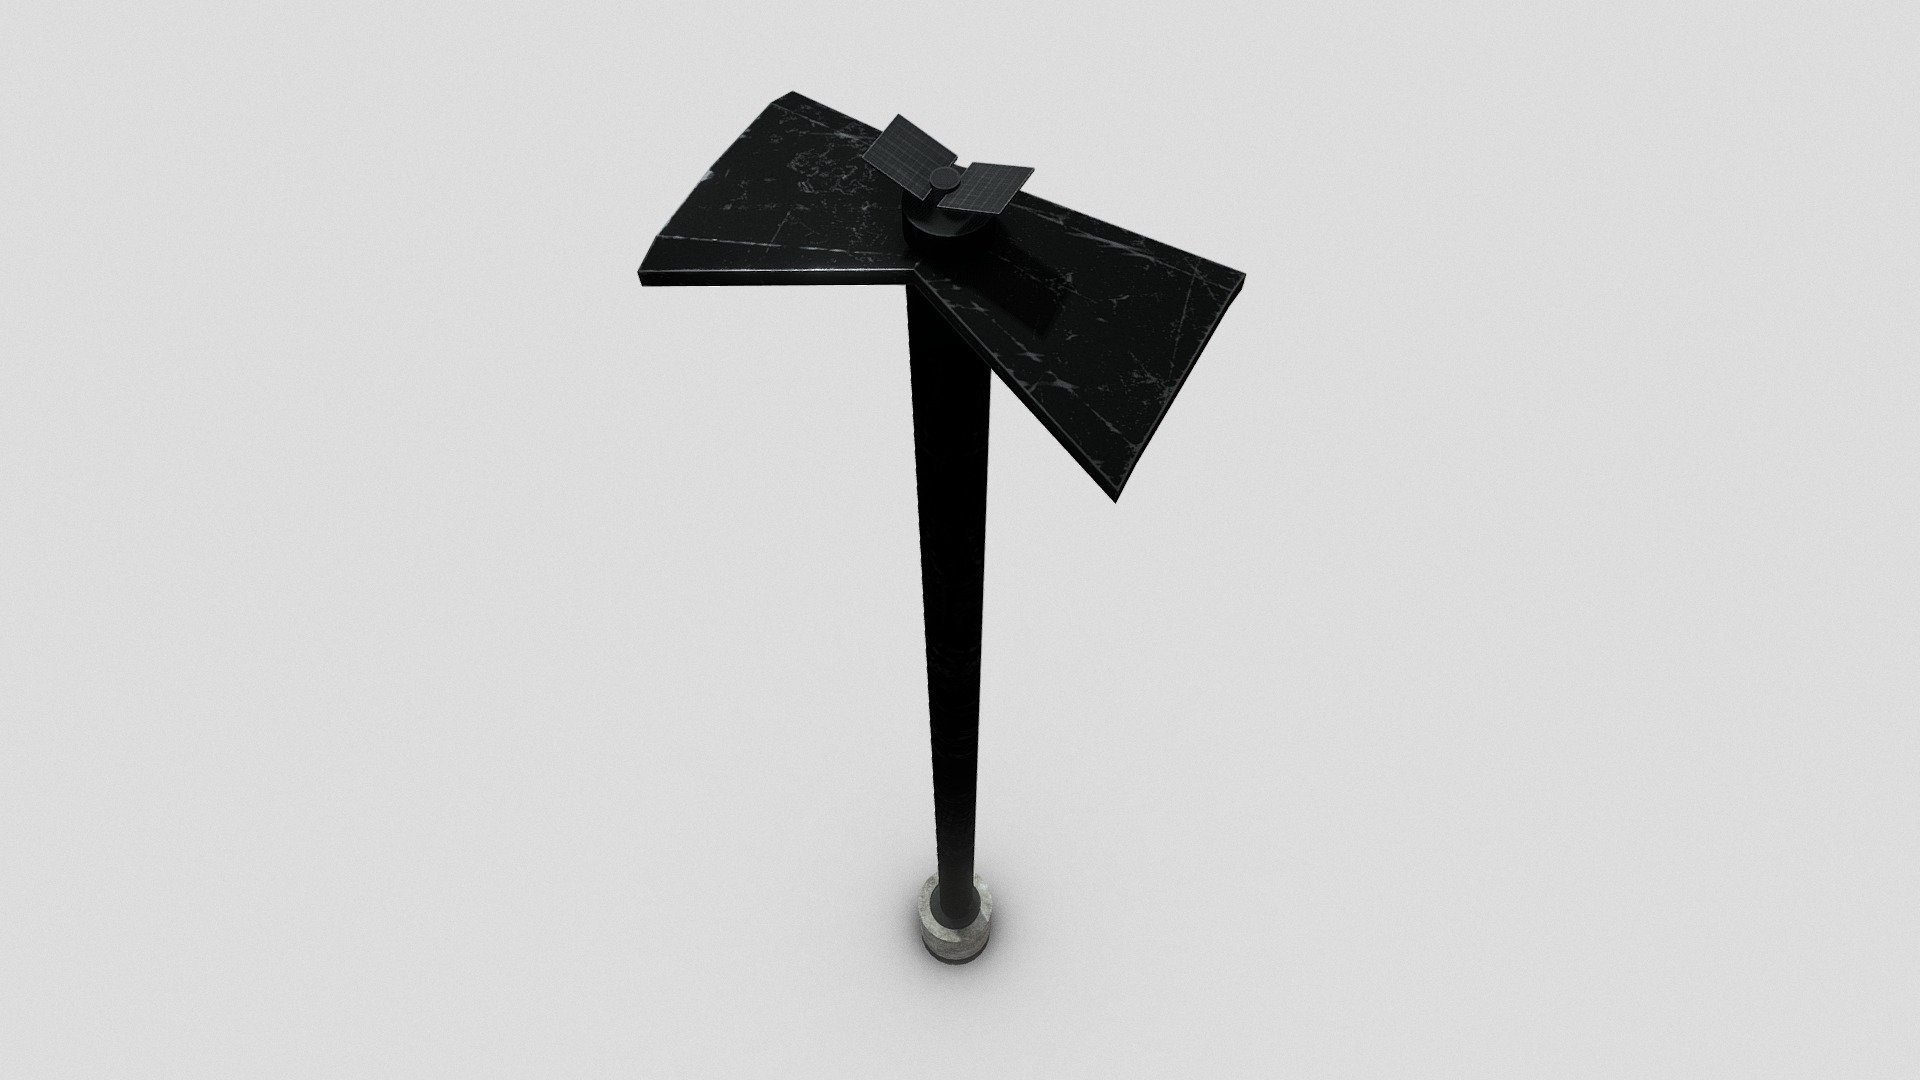 Parking Lot and street Lighting. Black metal pole with concrete base and solar panels - Street Light Pole - Parking Lot Lighting - Solar - Buy Royalty Free 3D model by Marc Sawyer (@whitewashstudio) 3d model